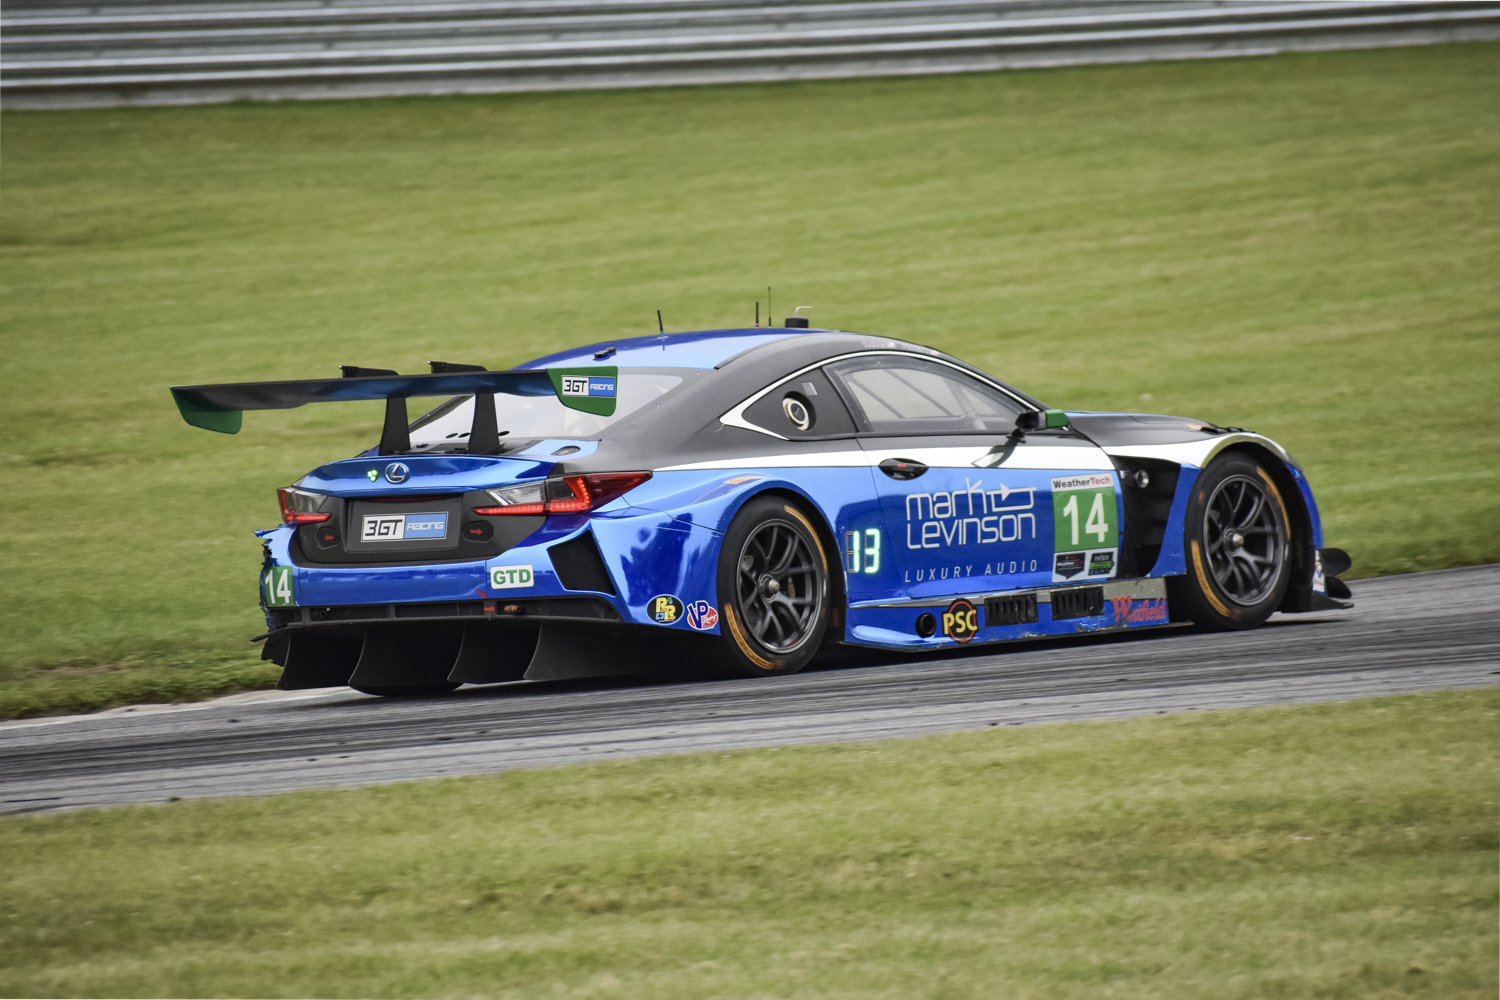 Lexus RC F GT3 driving off on a race track showing off the backside of the car and spoiler